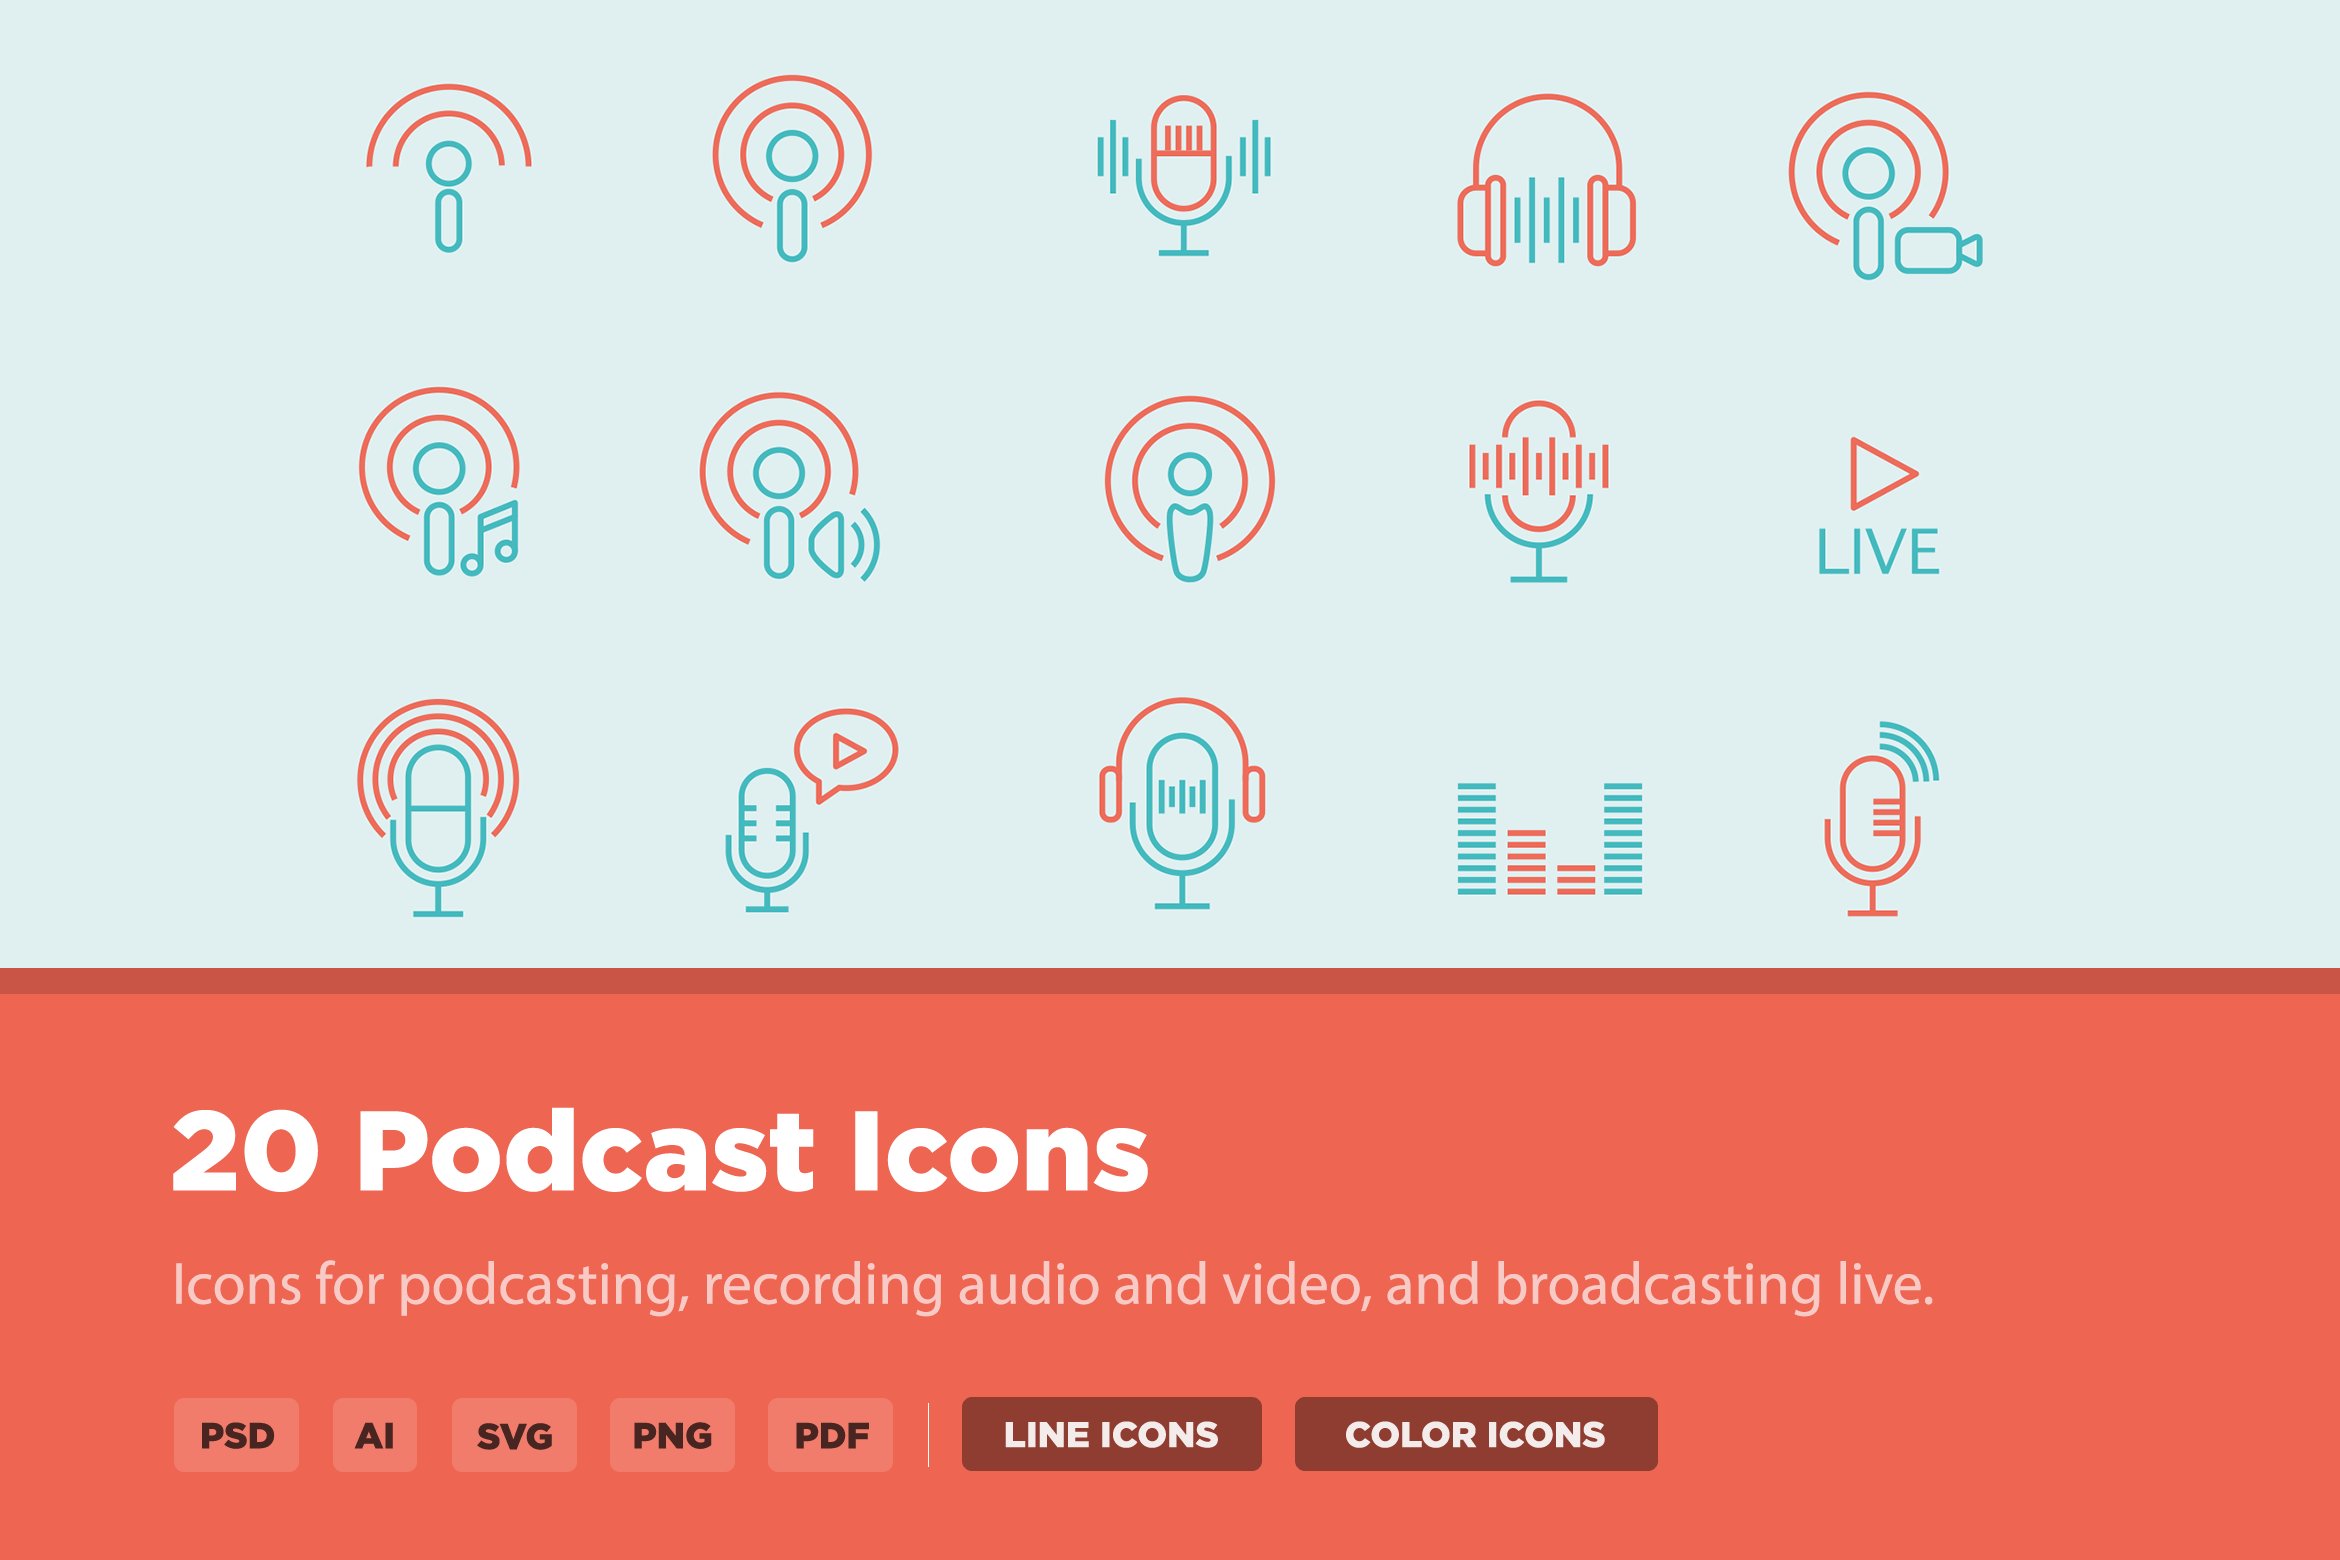 20 Podcast Icons cover image.